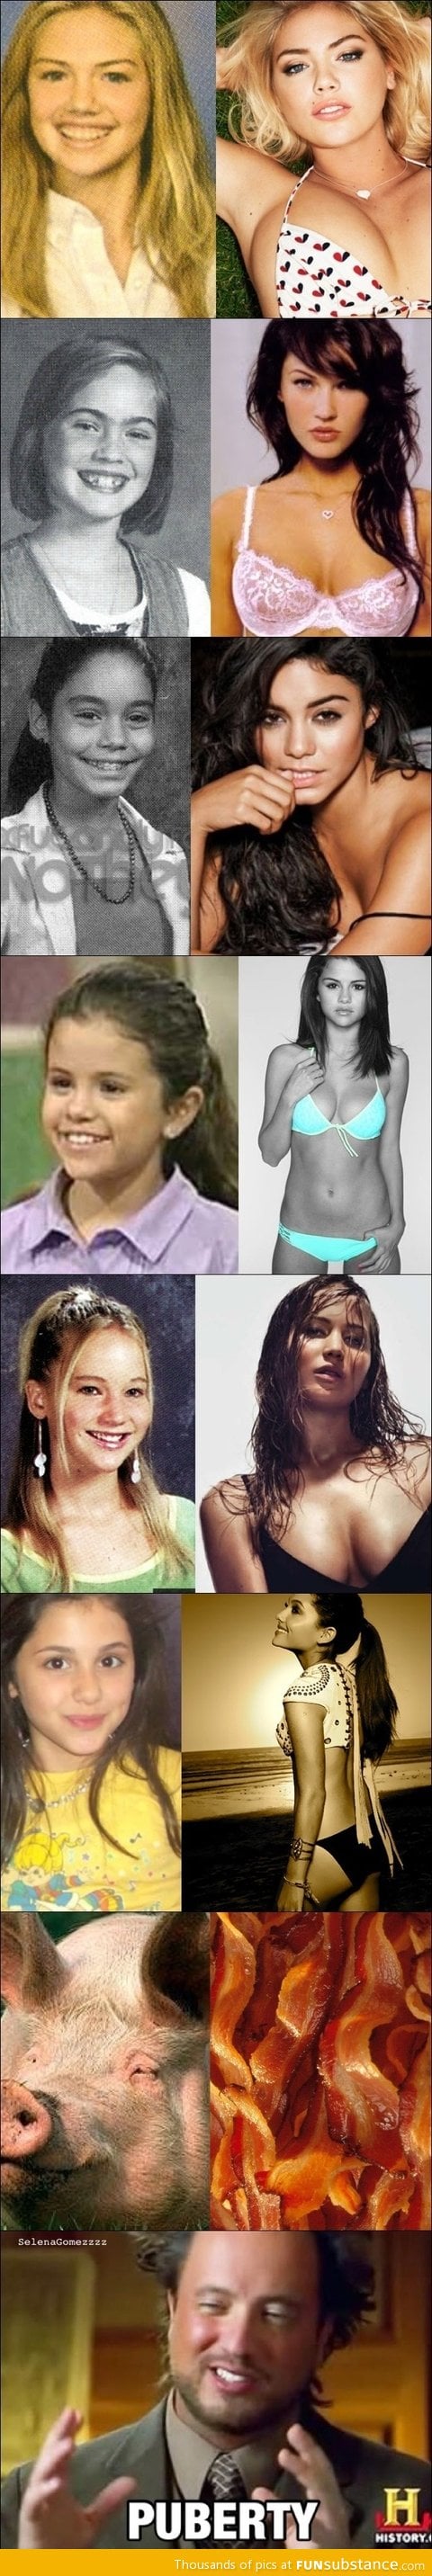 Puberty done right